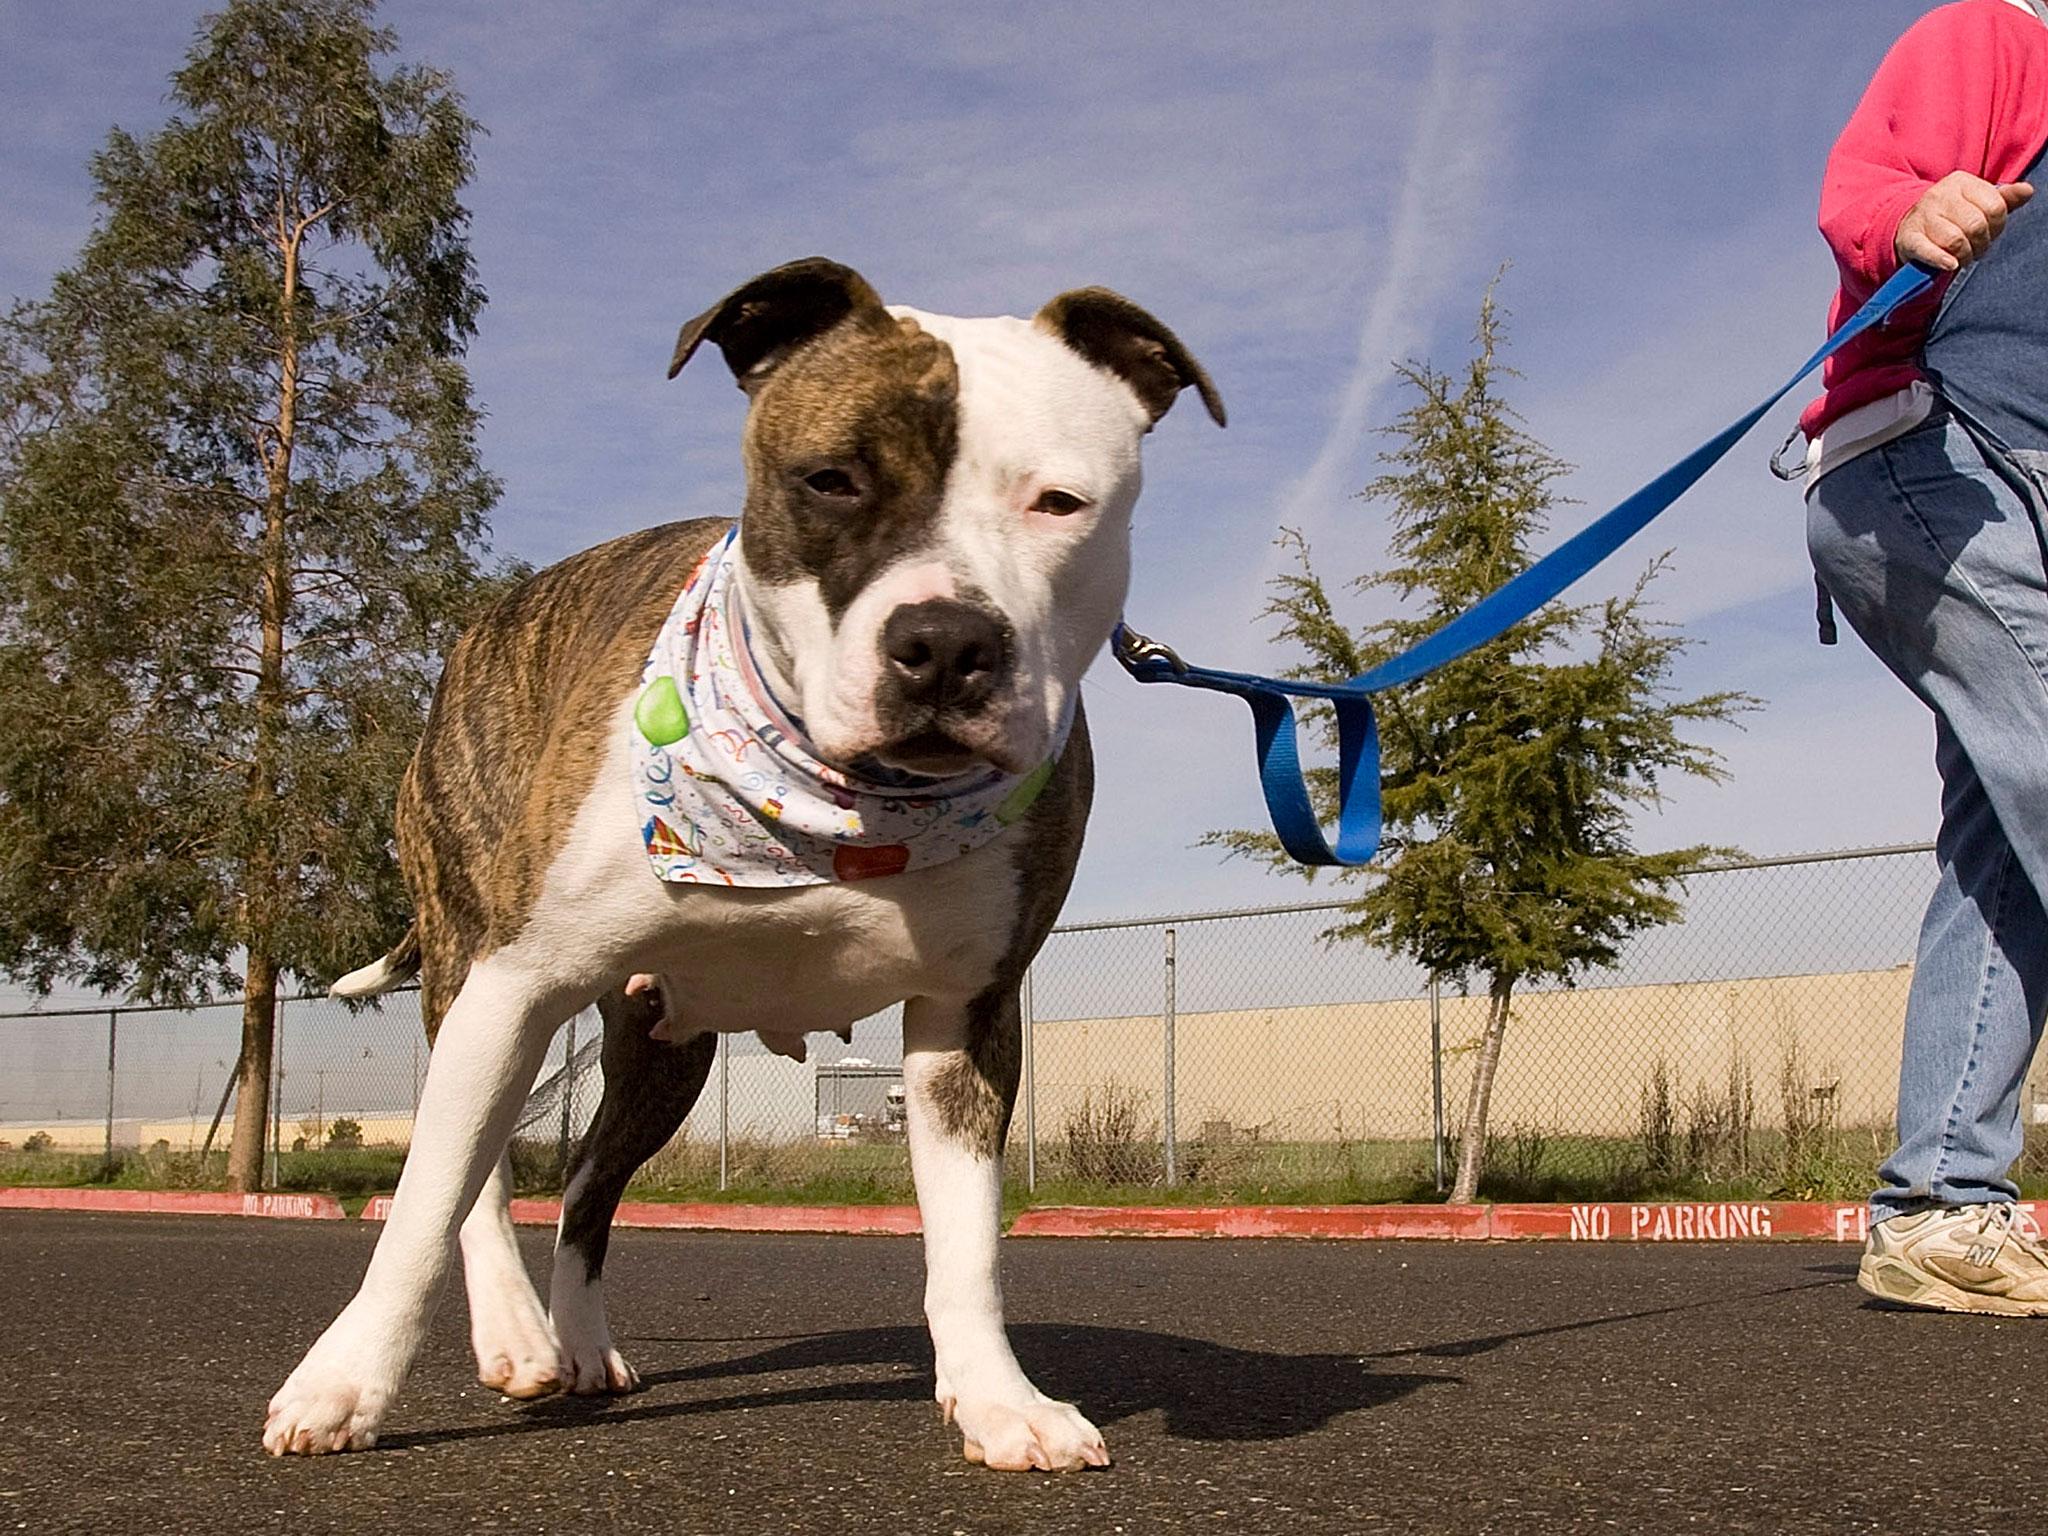 (Stock image) An American Staffordshire Terrier